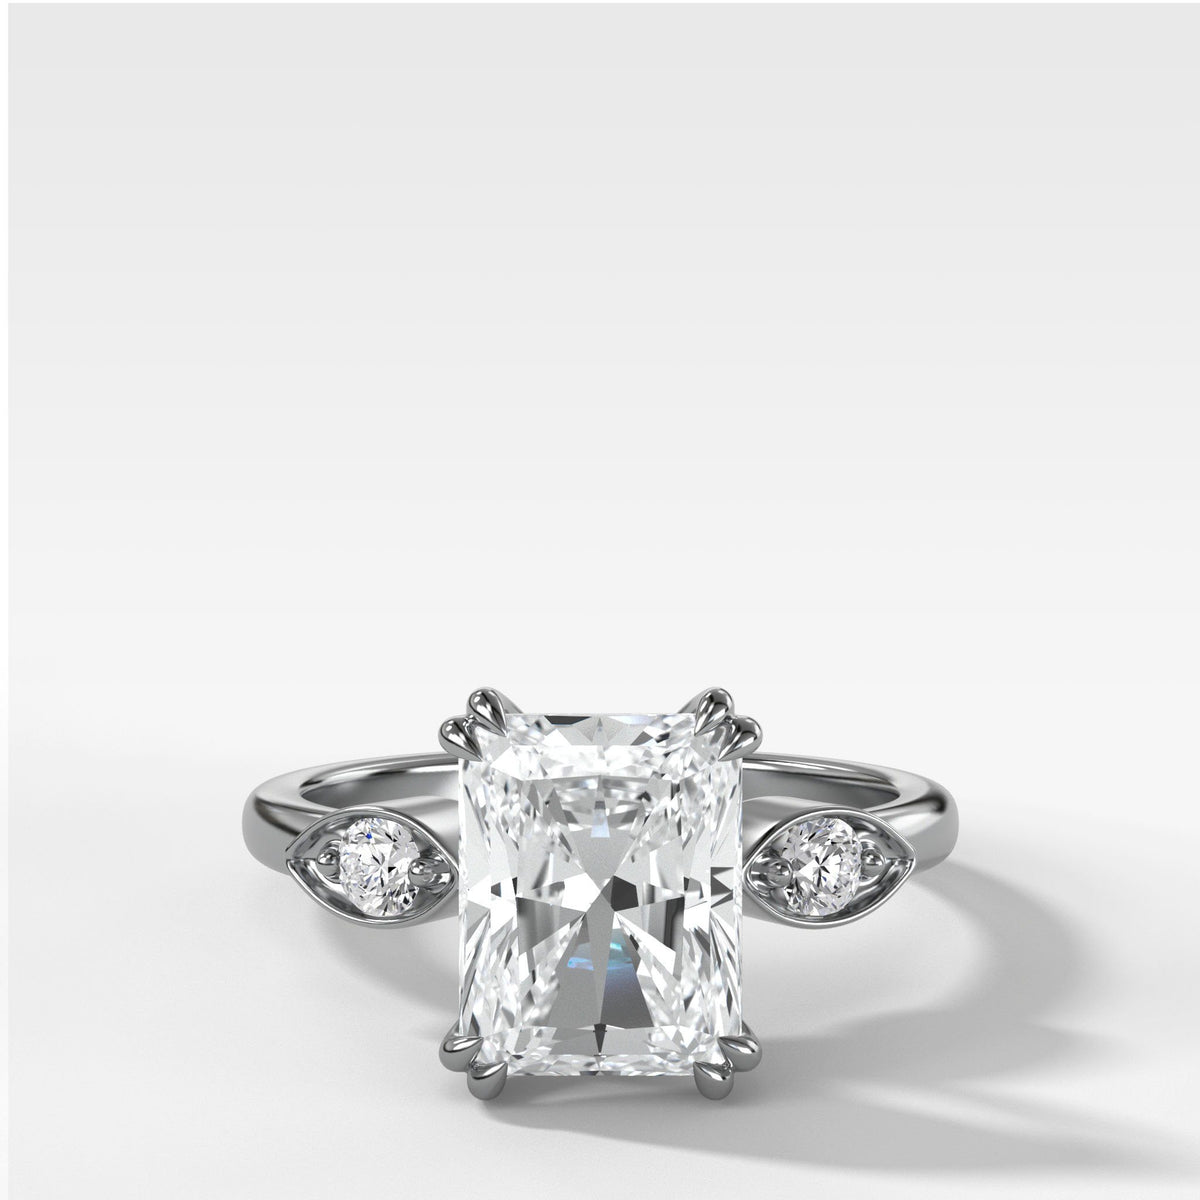 Vintage Ridge Shank Diamond Engagement Ring With Radiant Cut by Good Stone in White Gold